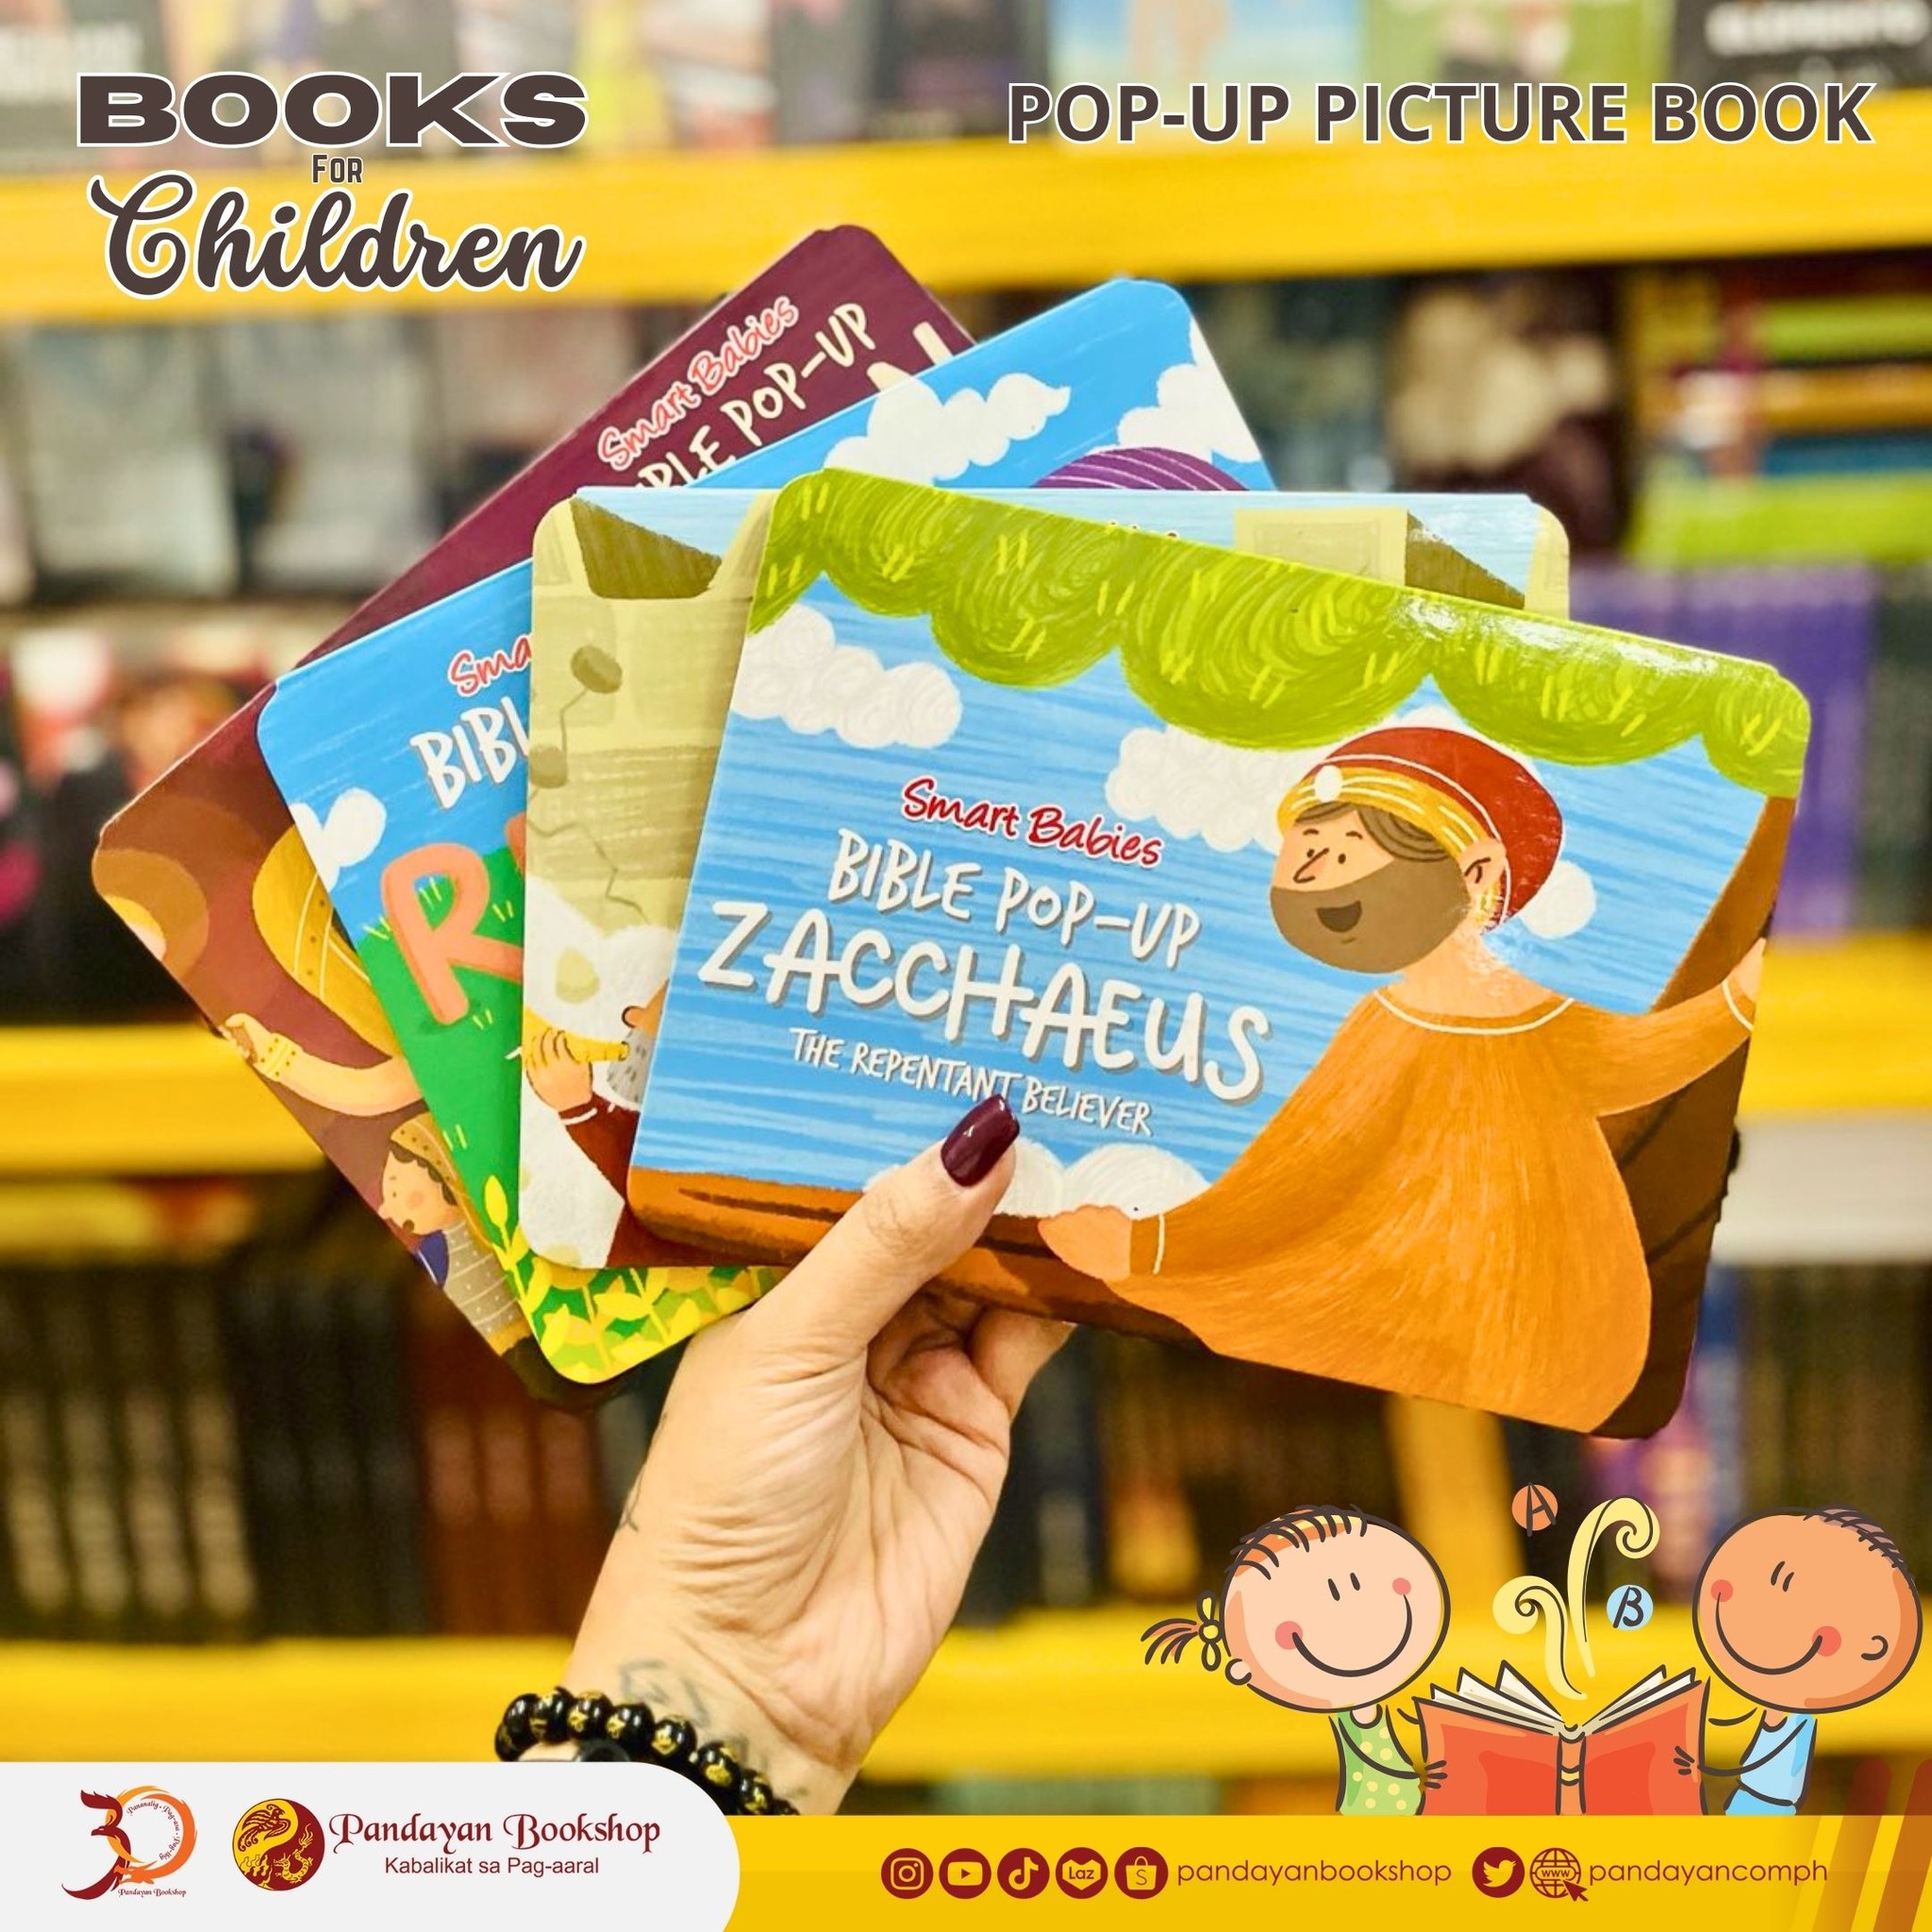 Pop-Up Picture Books for Children